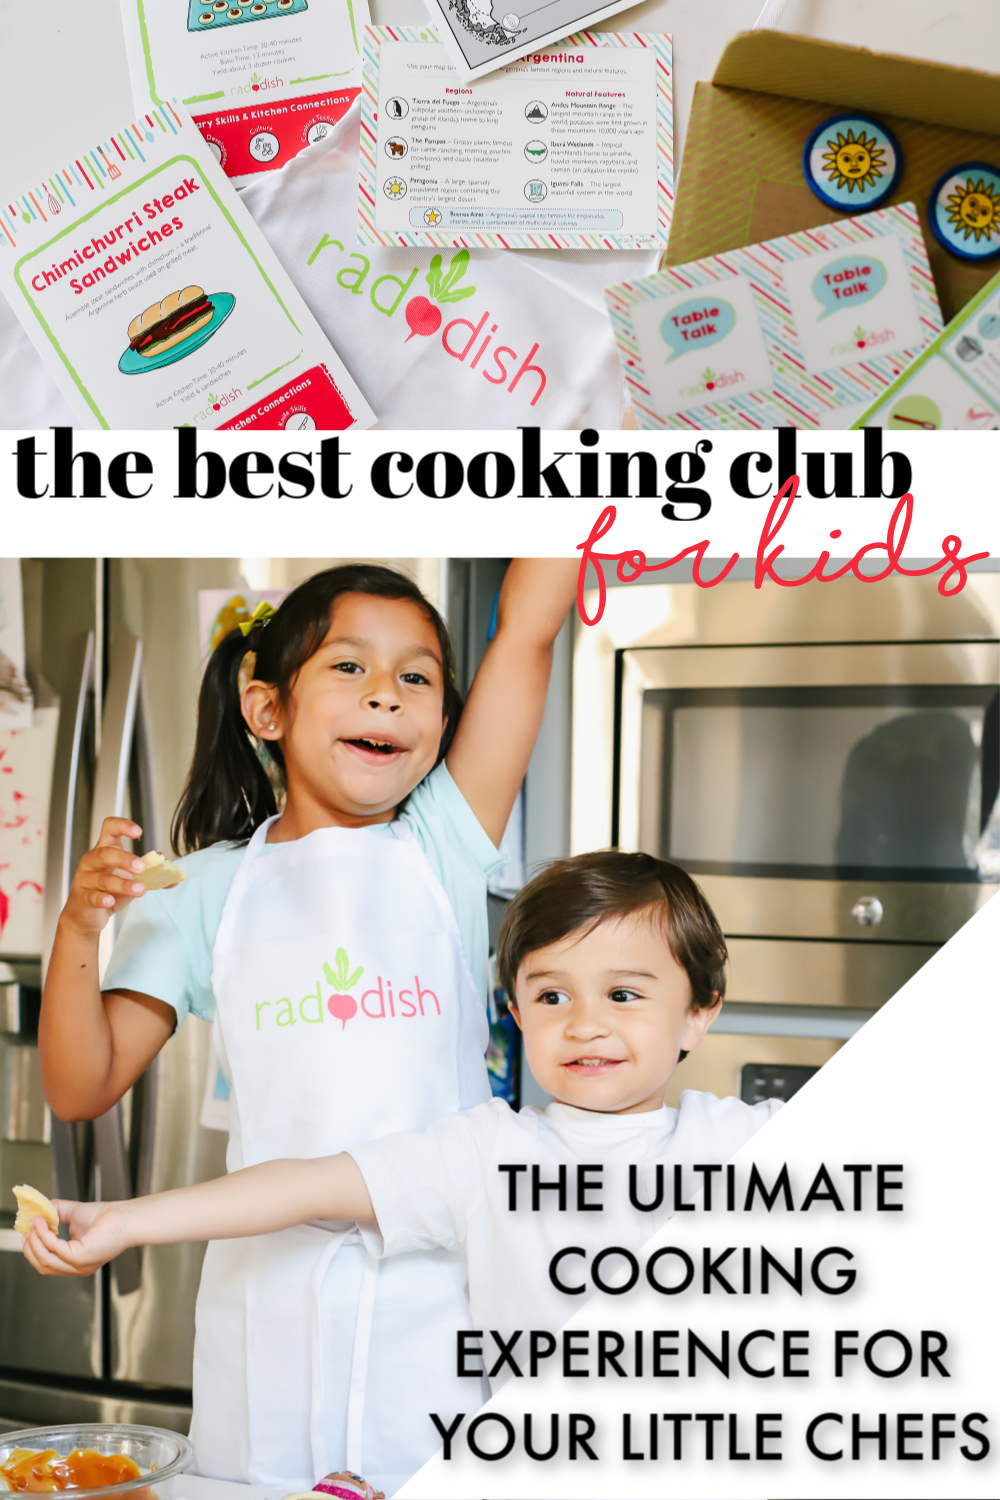 Meet @RaddishKids, the best themed, monthly cooking subscription box for kids that sends you all you need to have a one-of-a-kind culinary experience! It fosters imagination, connection, and family time. It has the best recipes, the best illustrated recipes & instructions, apron, and more! Head to the blog and read more about our latest obsession! #AD #RadKidsCook #RaddishKids #KidsintheKitchen #CookingwithKids #RaddishPartner